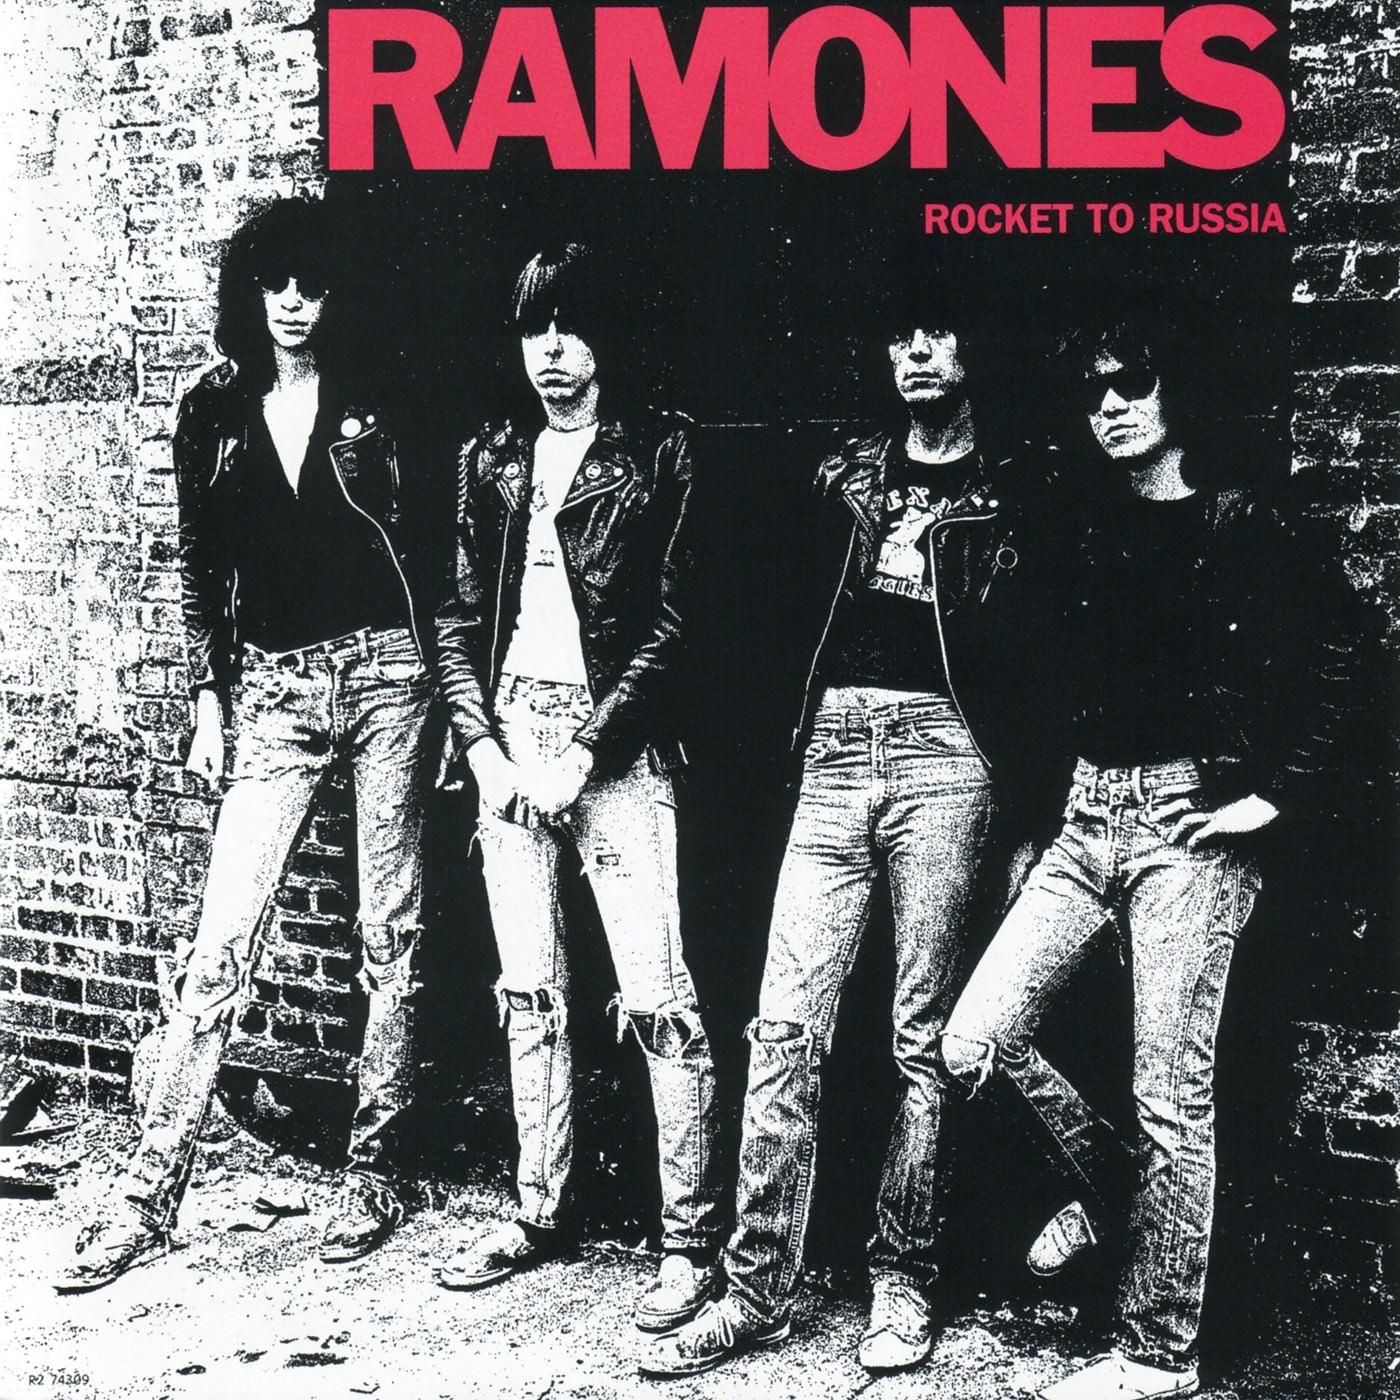 ROCKET TO RUSSIA: THE PUNK ROCK ART OF THE RAMONES